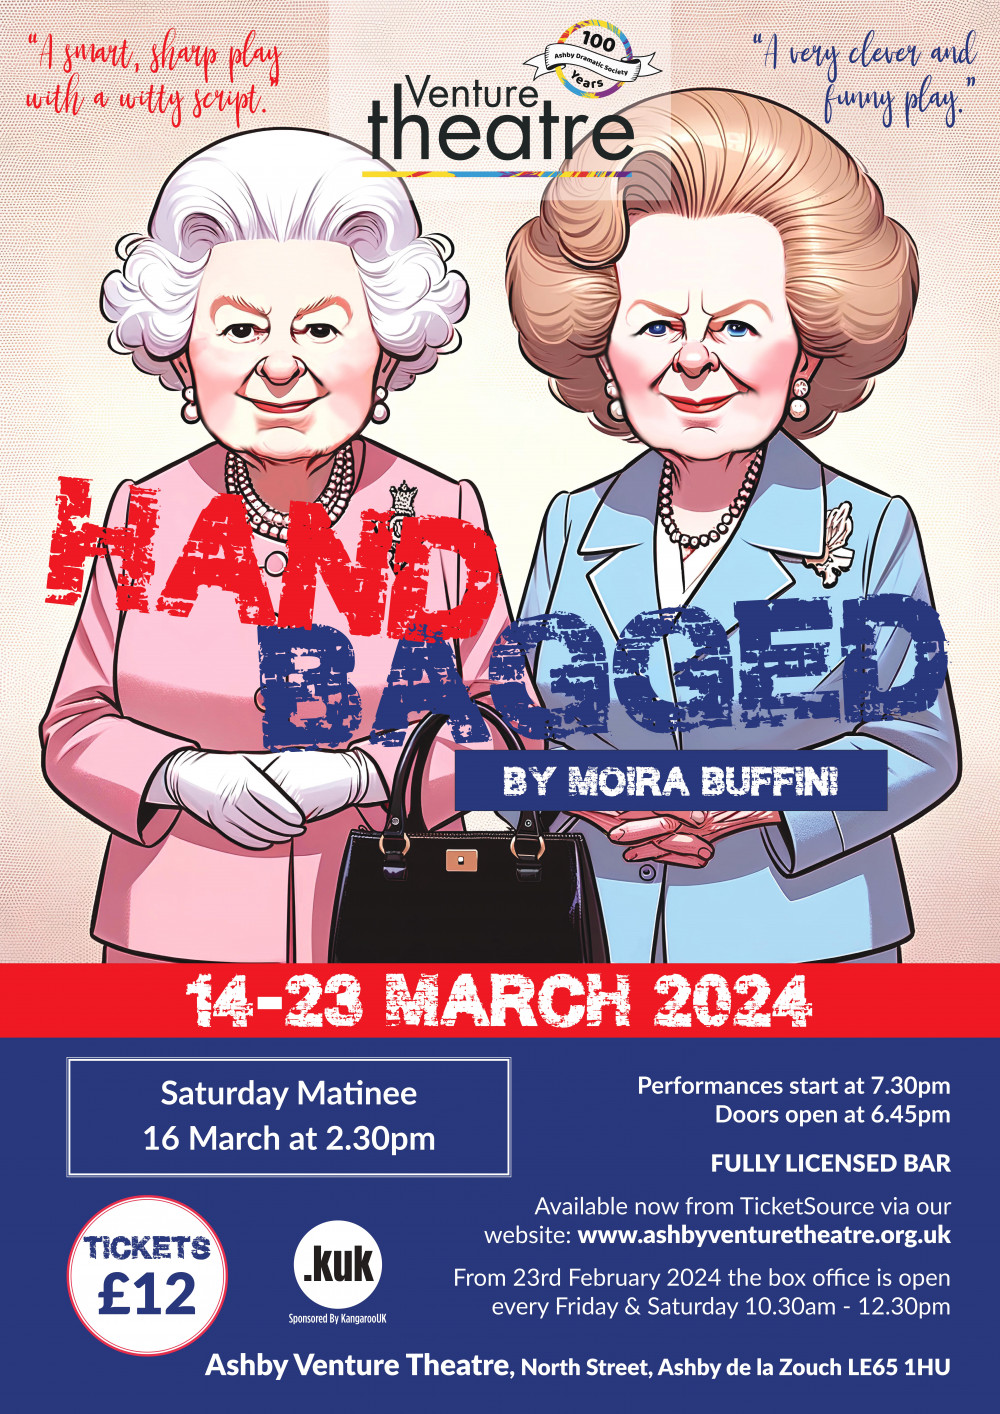 Handbagged, a play by Moira Buffini at the Venture Theatre, Ashby-de-la-Zouch